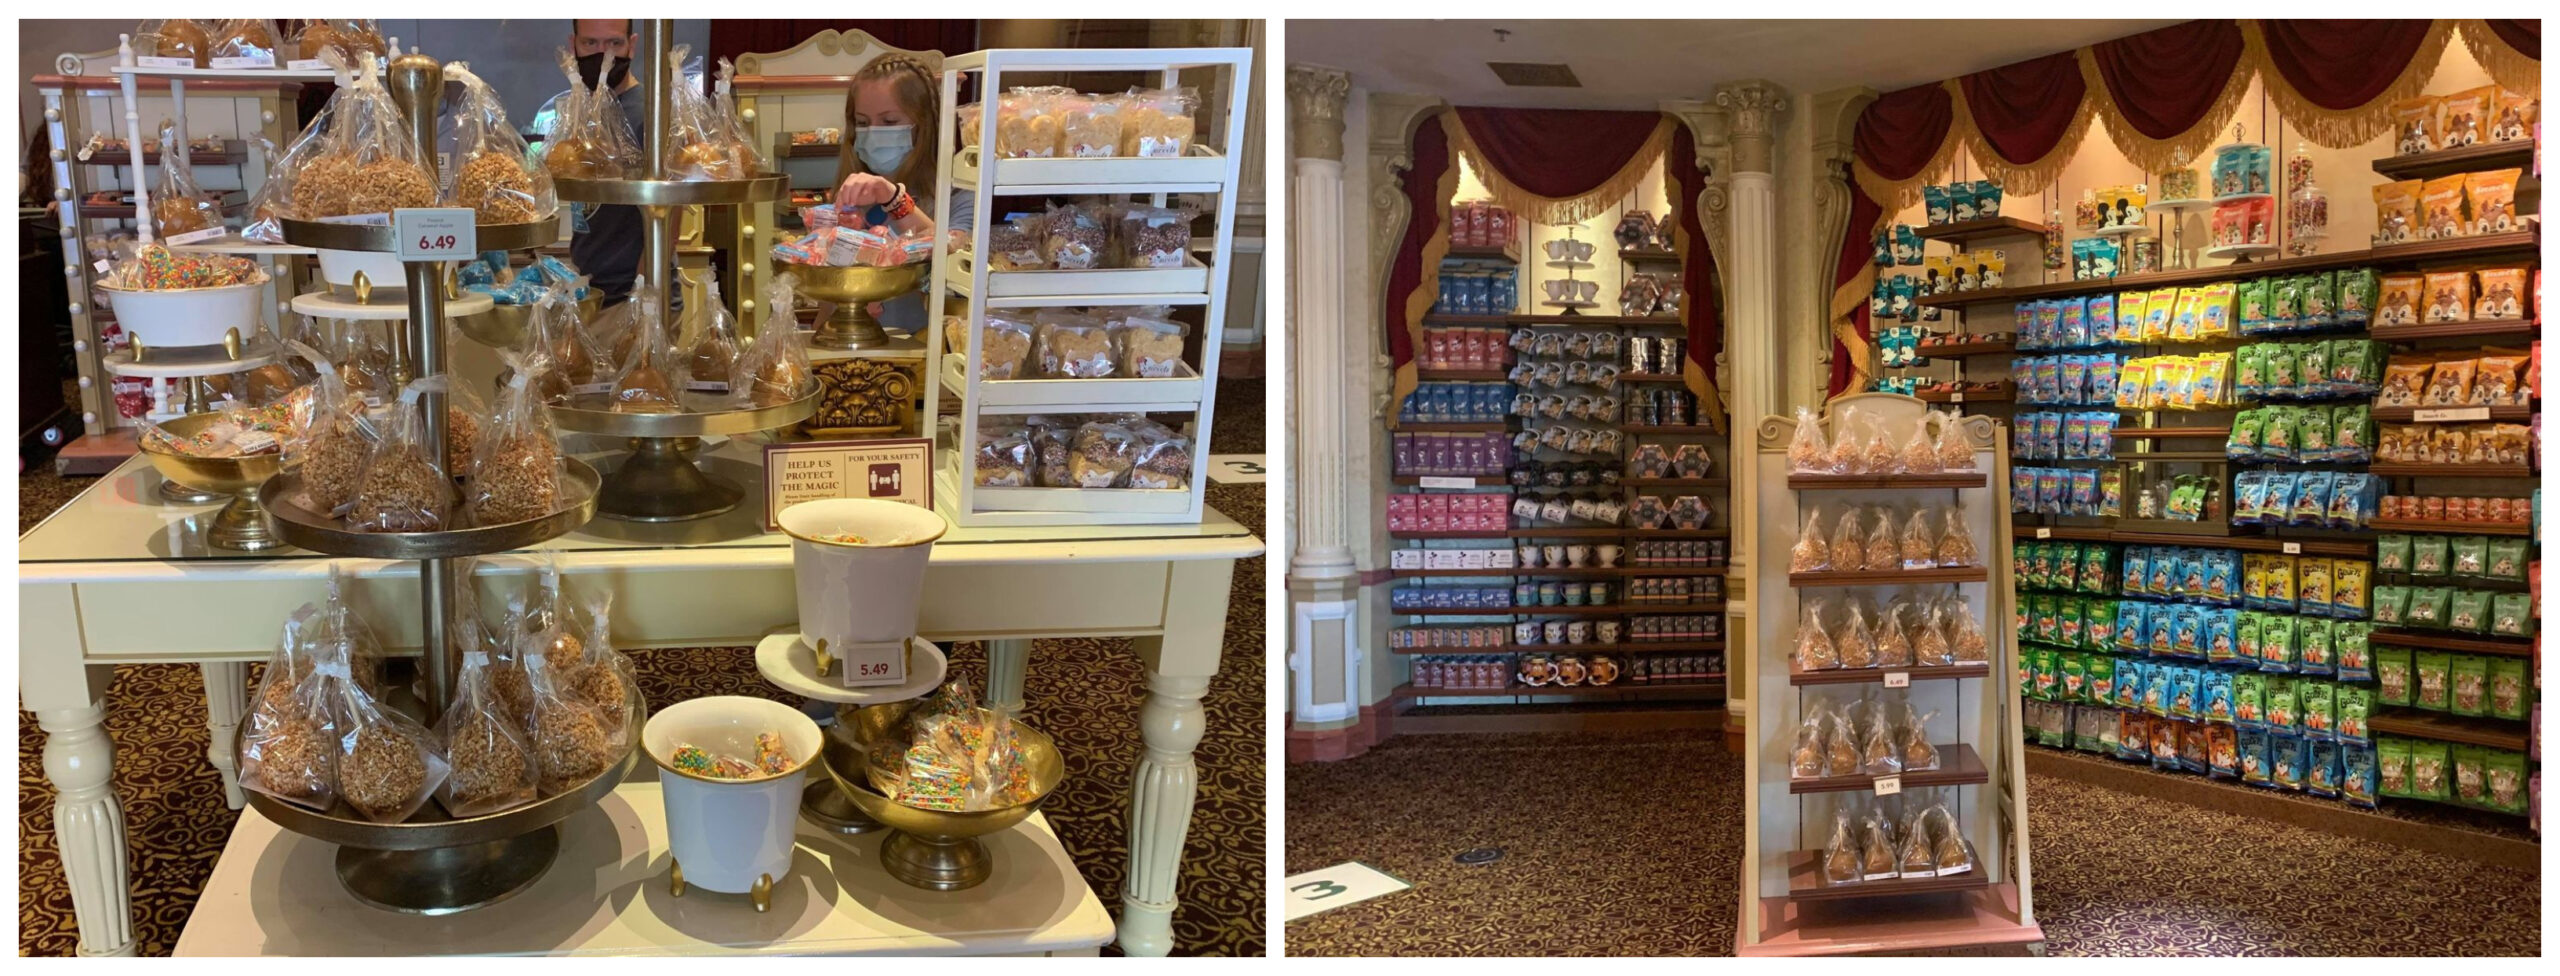 Main Street Confectionery now open in temporary location at the Magic Kingdom